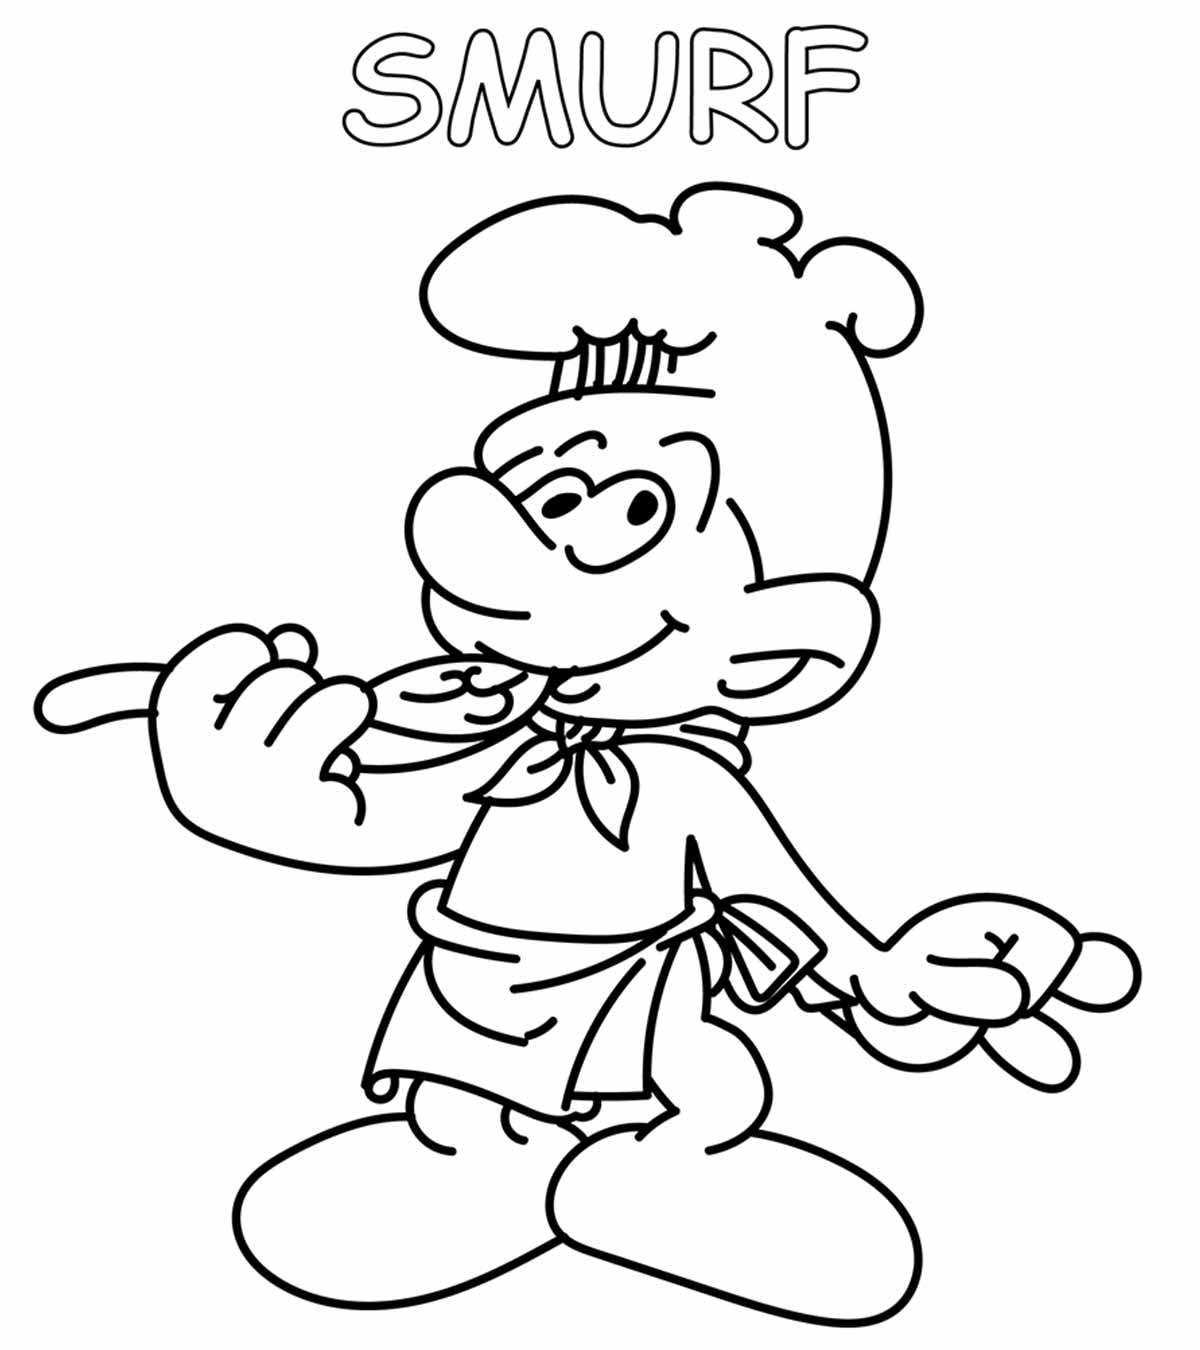 25 Funny Smurf Coloring Pages For Your Little Ones_image